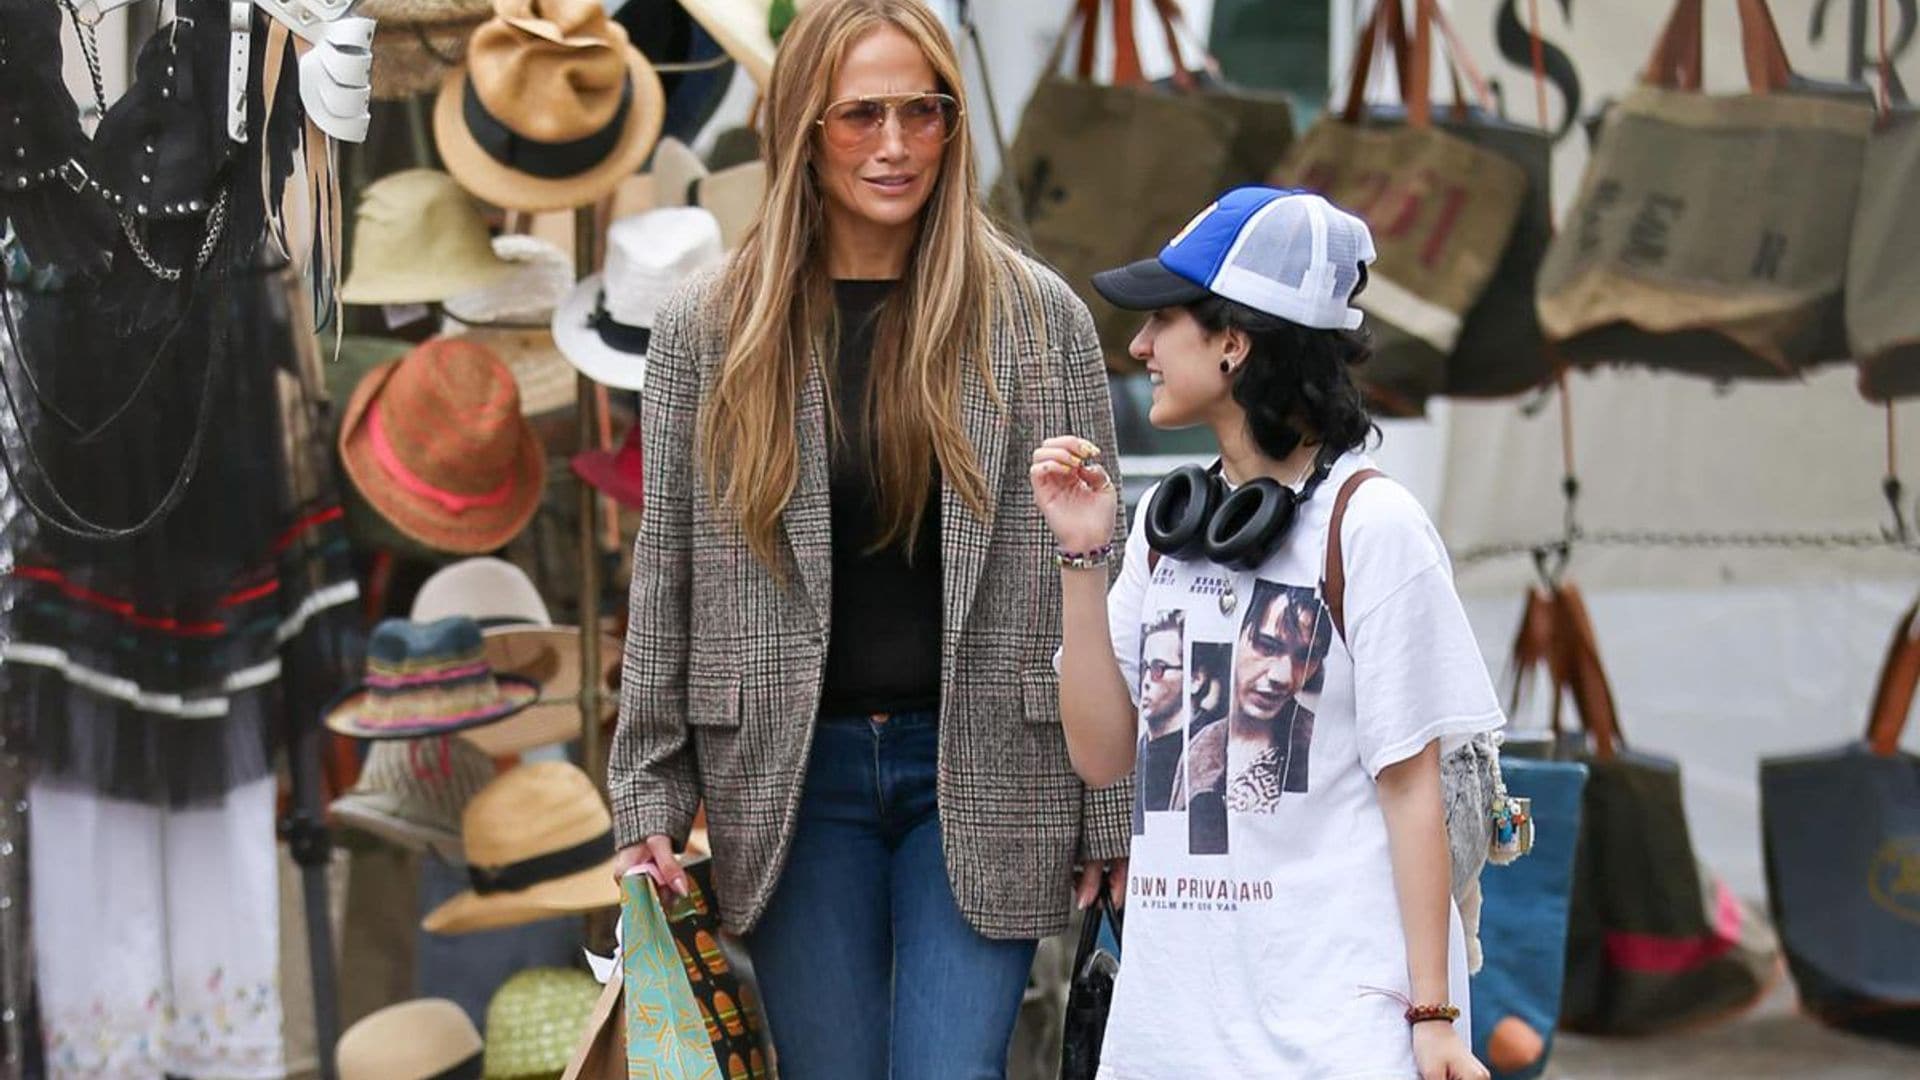 Jennifer Lopez and her daughter were spotted shopping at a flea market after tour cancellation